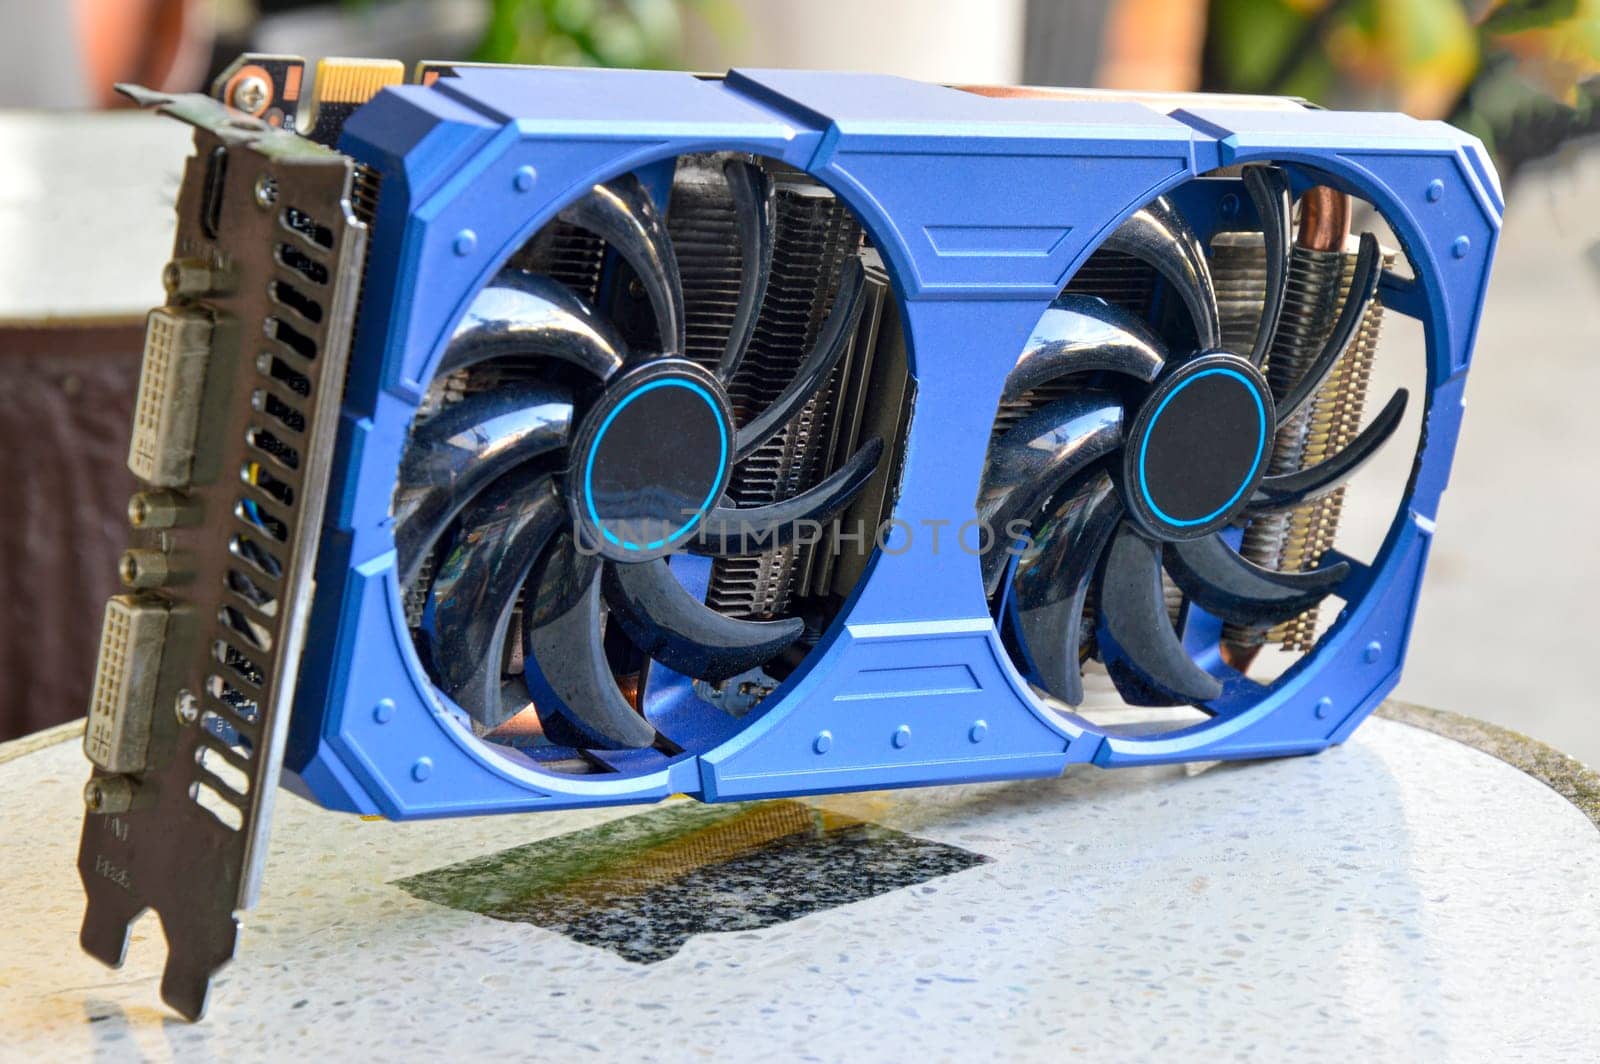 side view of graphics card, graphics card with blue color